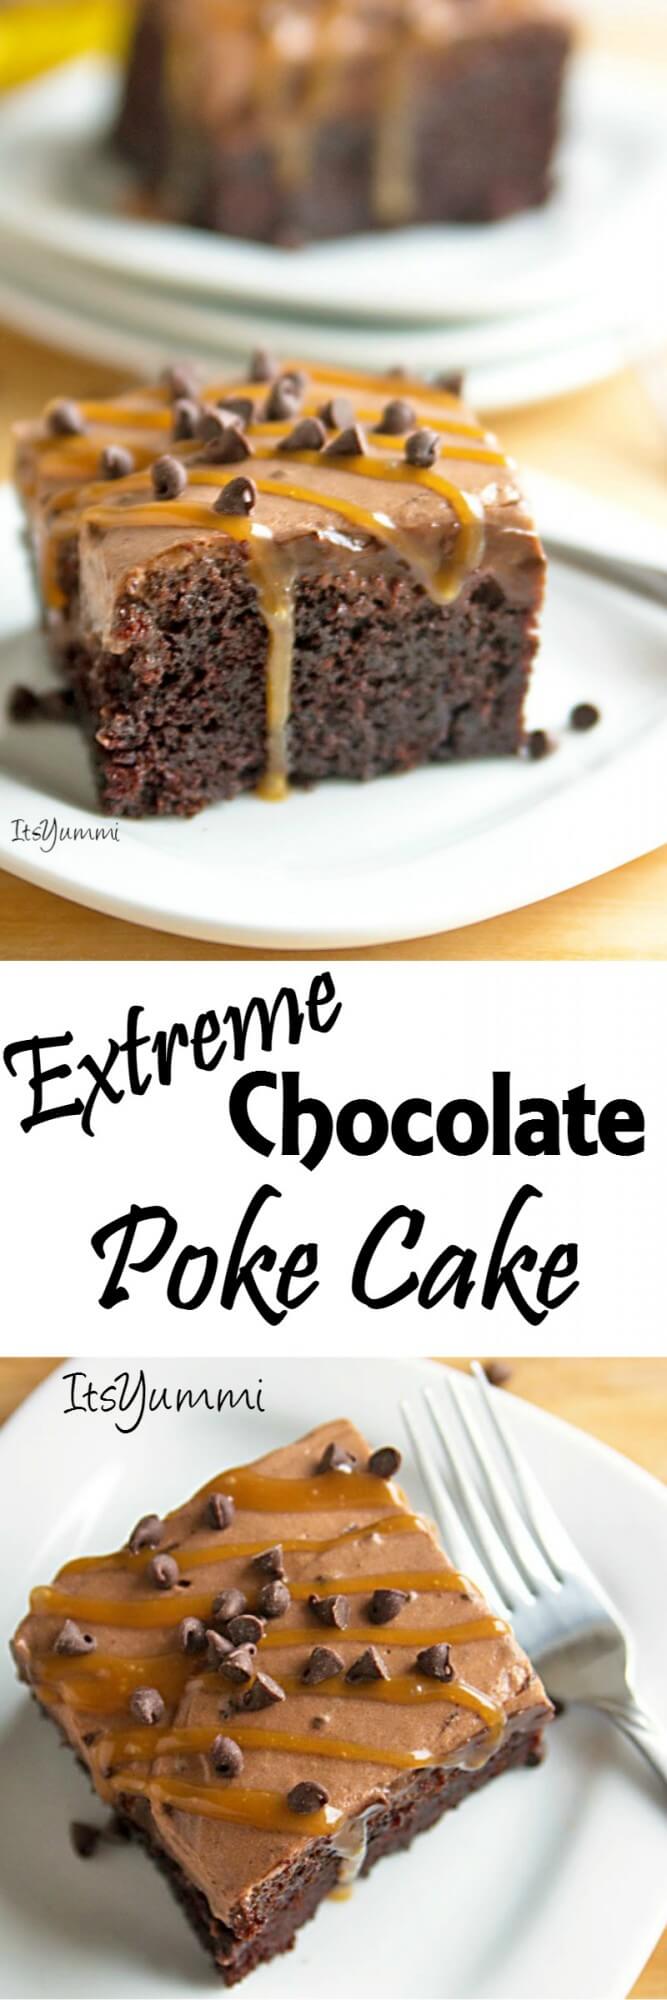 Extreme Chocolate Poke Cake - This dessert has 5 different layers of chocolate in it! Chocolate cake, chocolate pudding, chocolate ganache, chocolate whipped cream, and mini chocolate chips. It's all topped off with a drizzle of caramel, making this an extreme chocolate lover's dessert! Recipe on ItsYummi.com